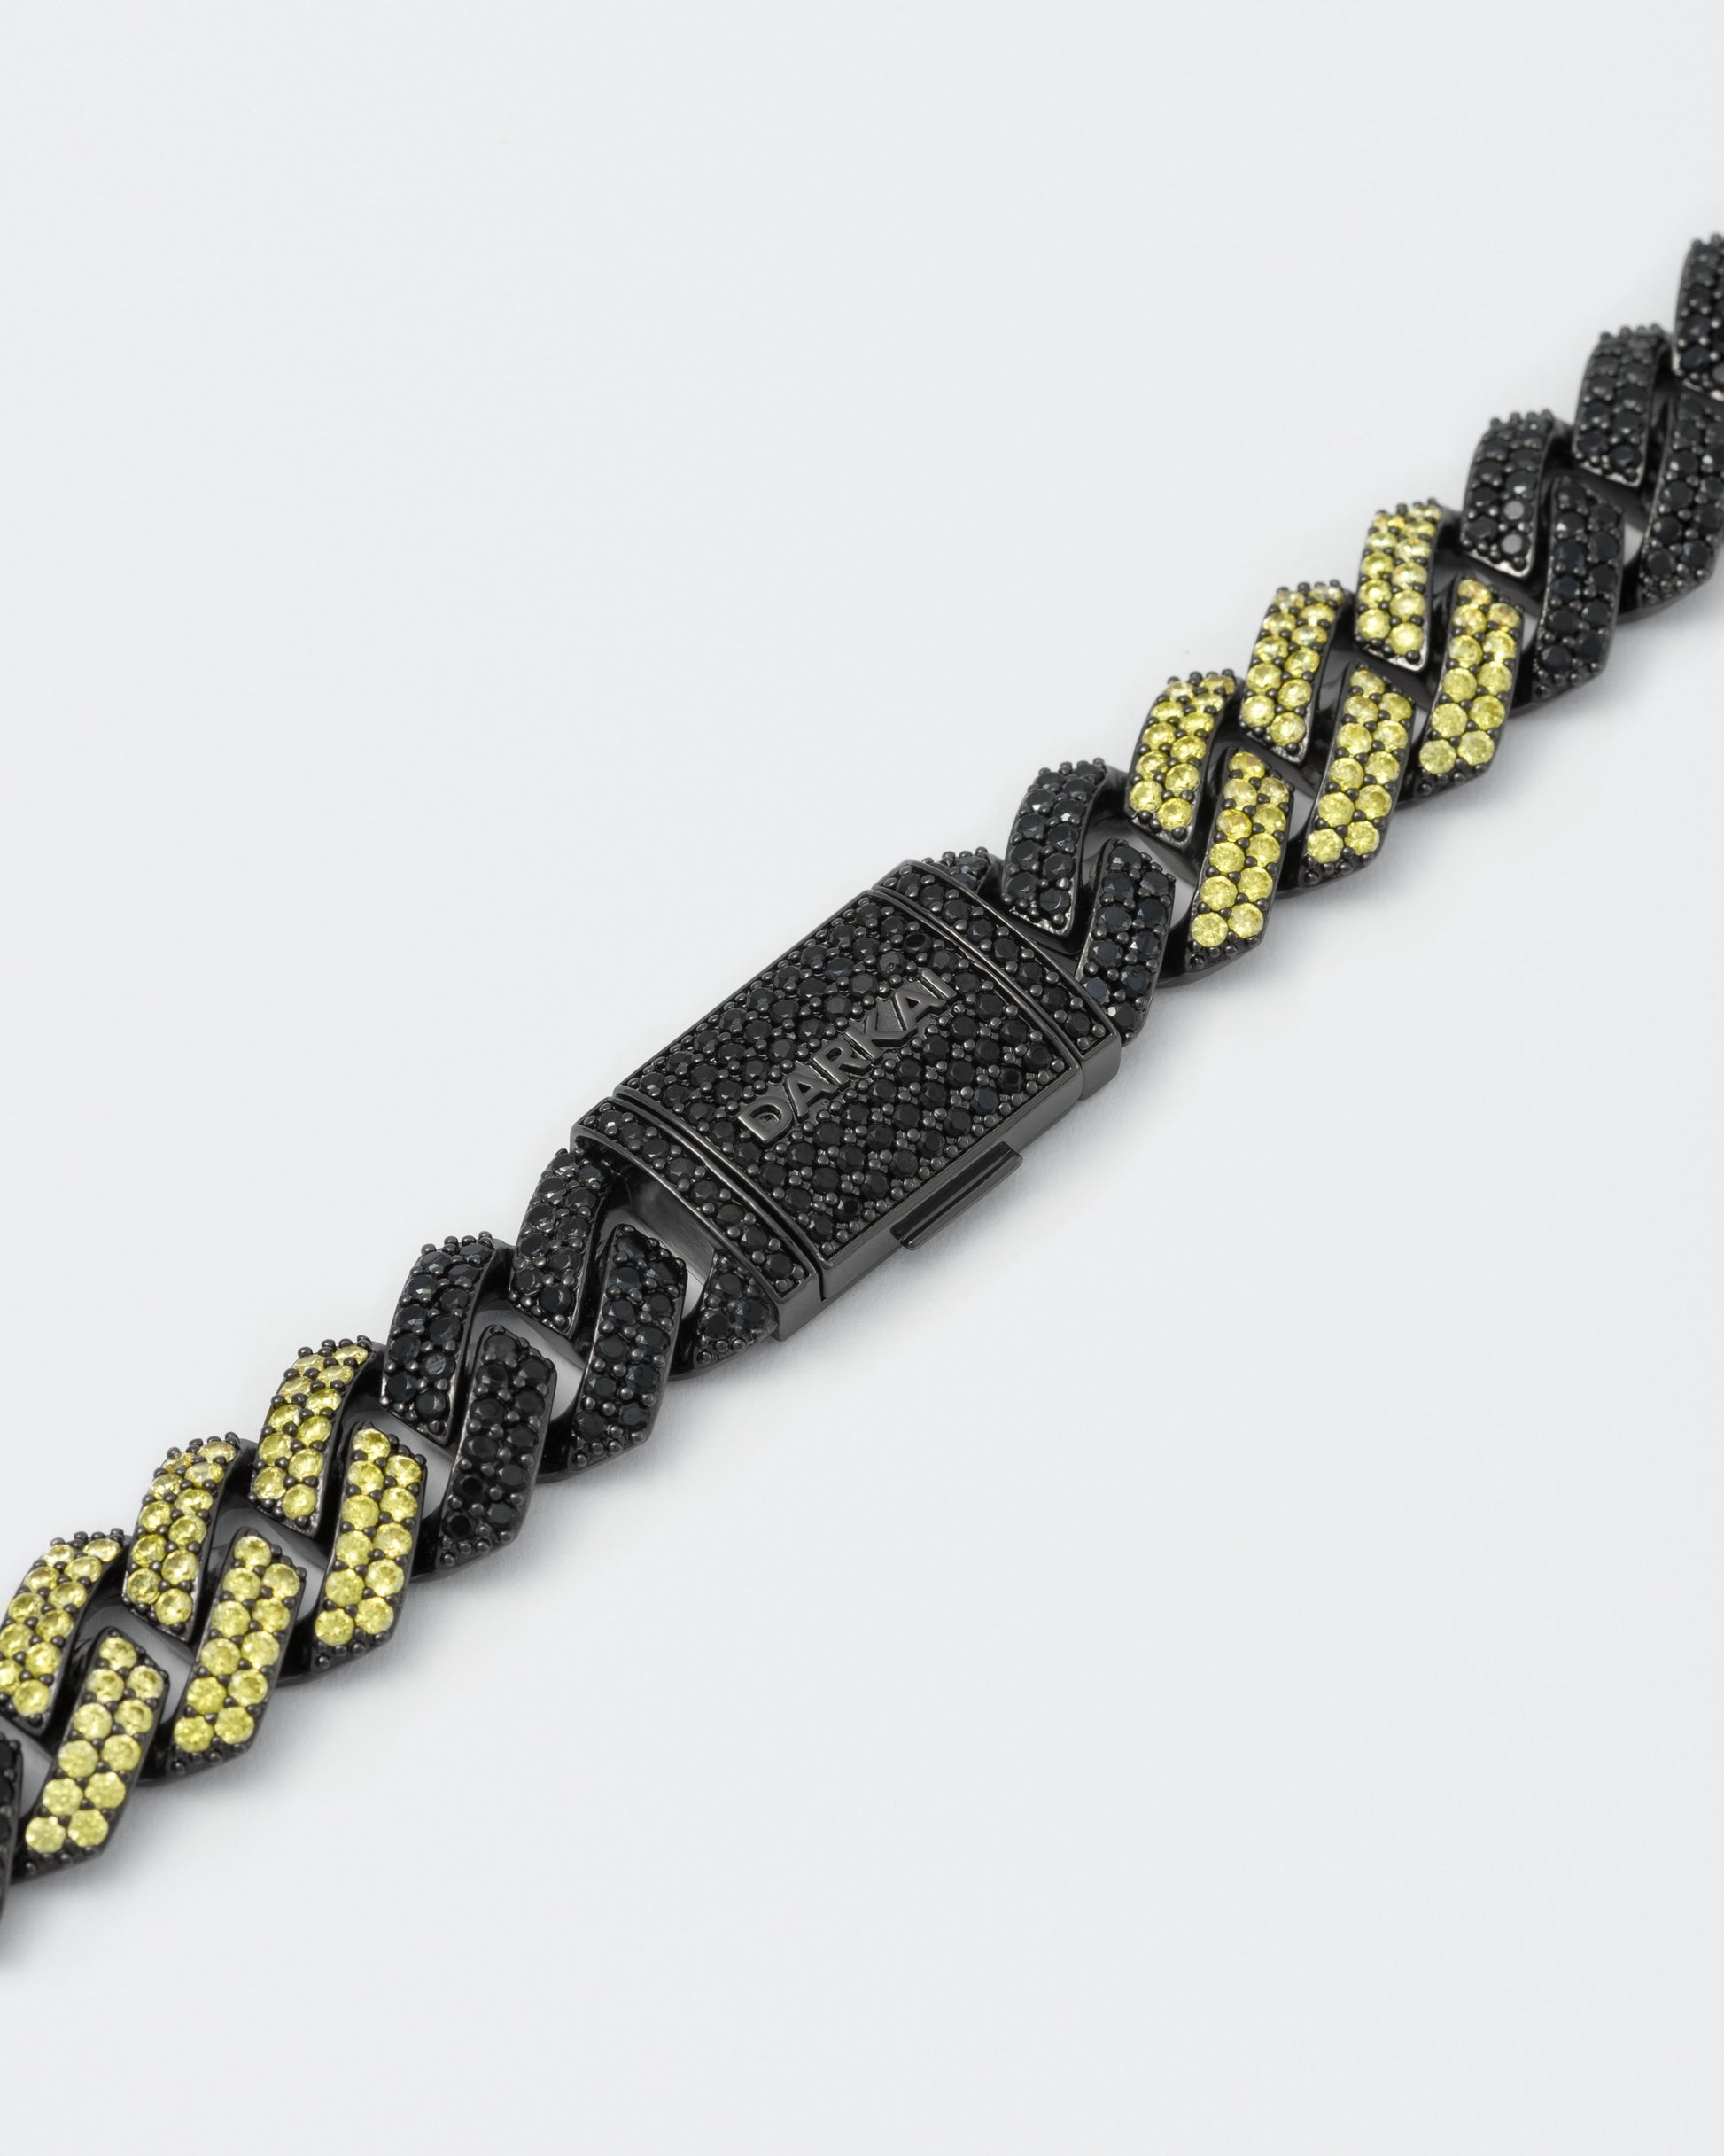 detail of prong chain bracelet with deep black PVD coating and hand-set micropavé stones in black and golden yellow. Fine jewelry grade drawer closure with logo